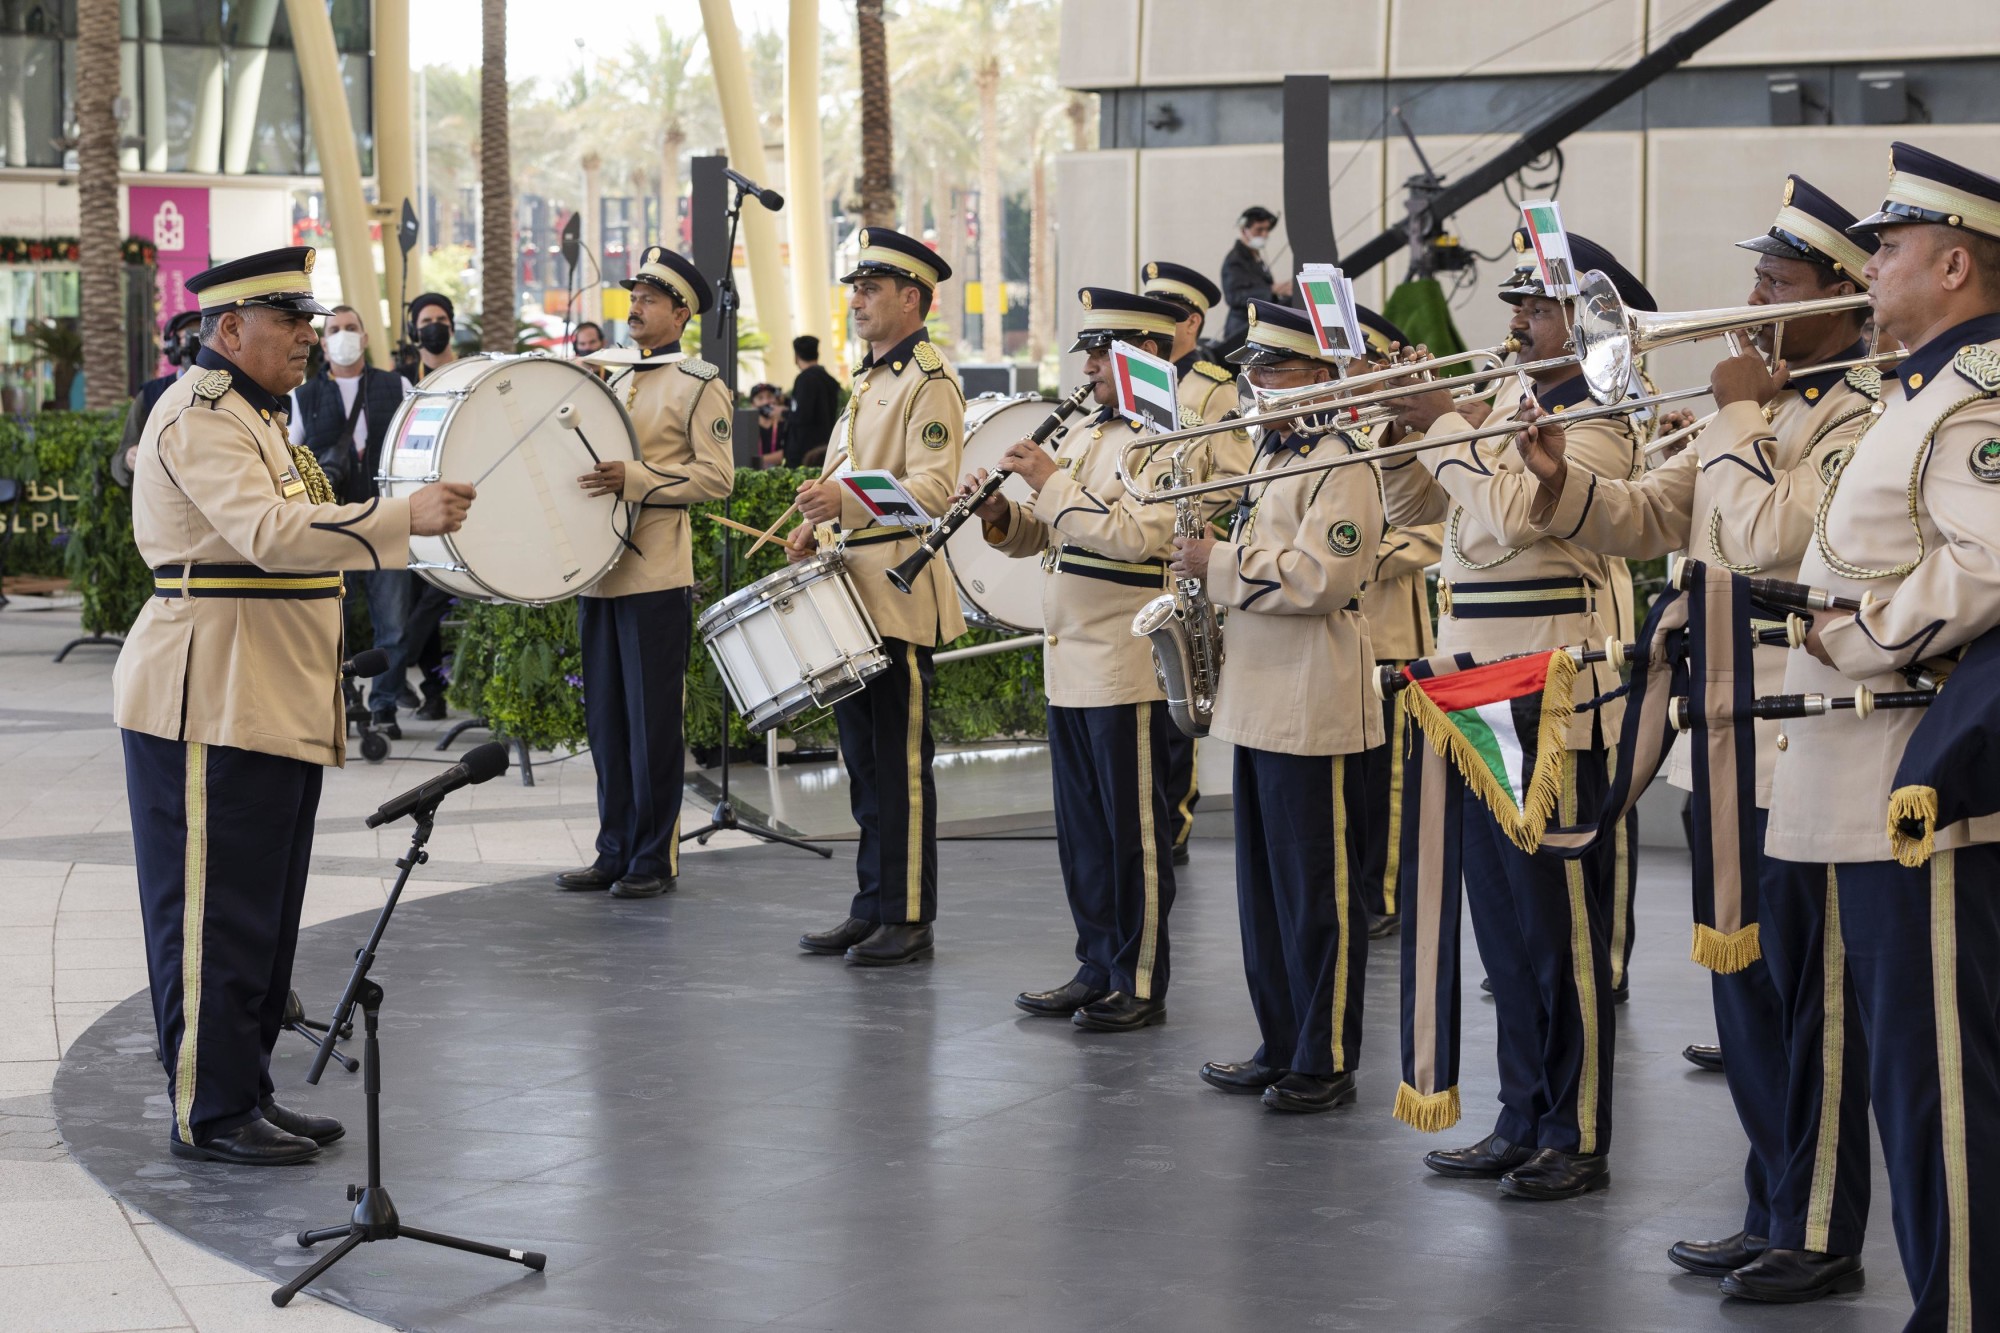 Marching Band performance during the League of Arab States Honour Day Ceremony in Al Wasl Plaza m25250